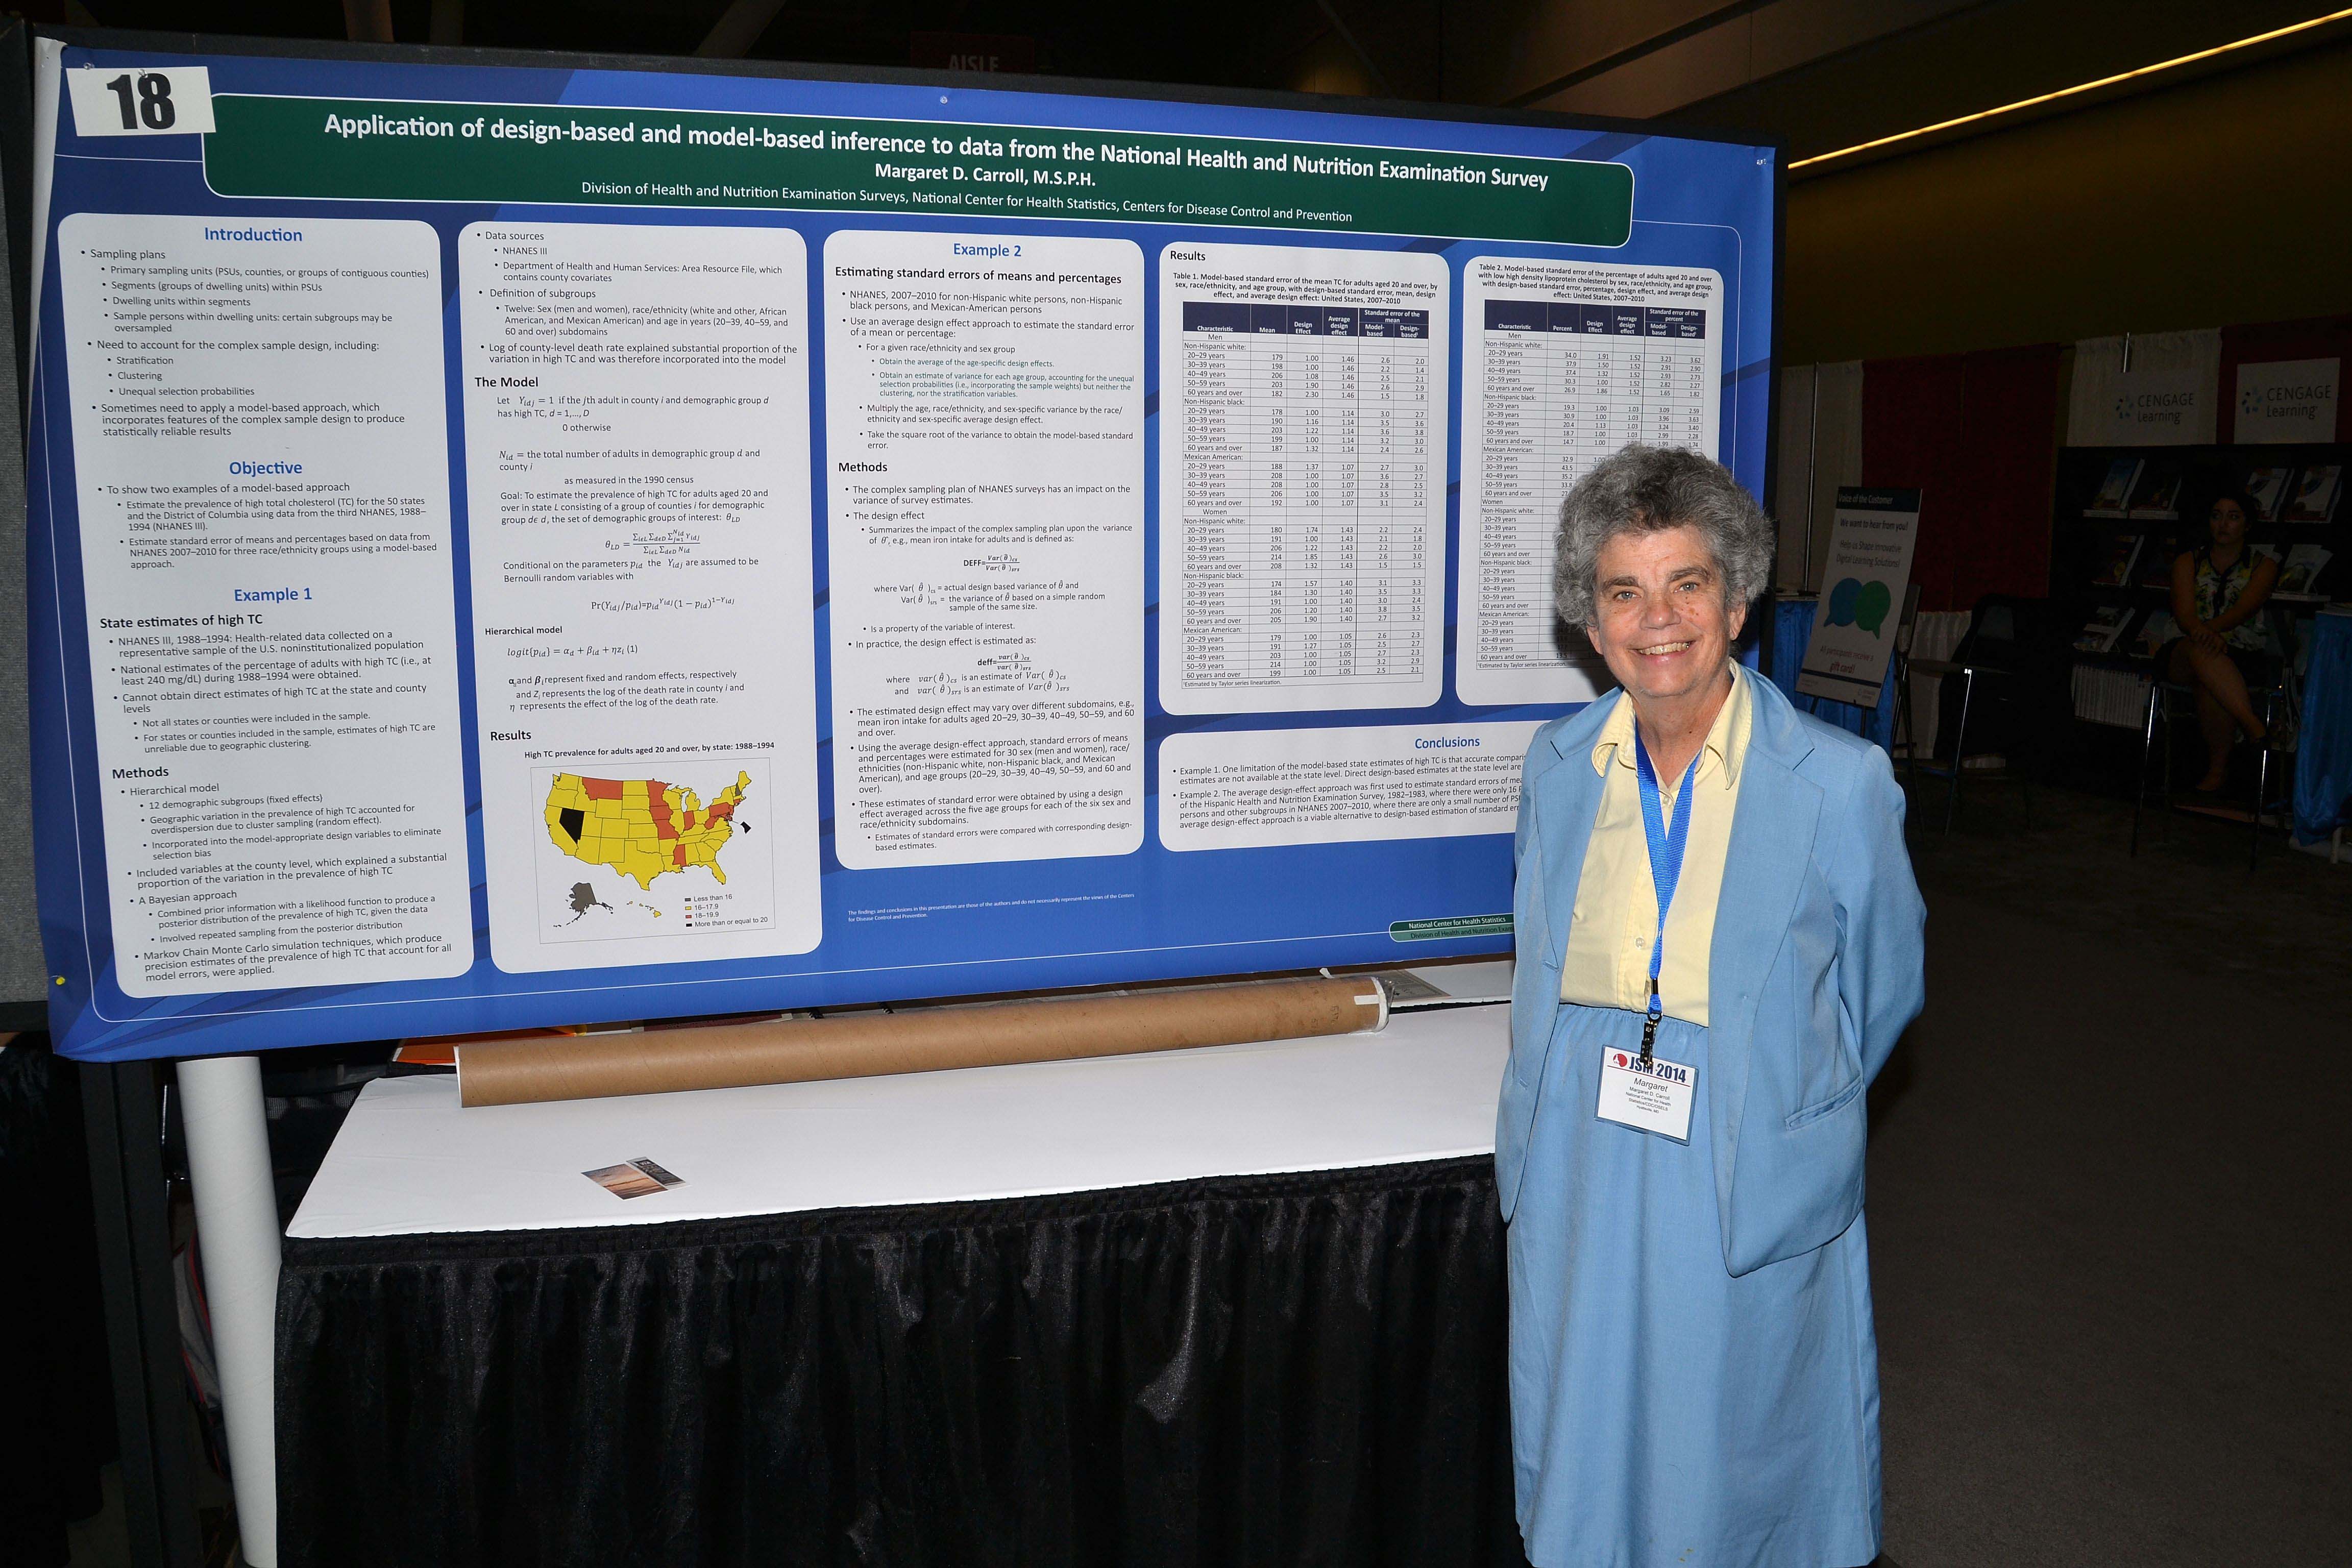 Margaret Carroll presents a poster titled "Application of Design-Based and Model-Based Inference to Data from the National Health and Nutrition Examination Survey"